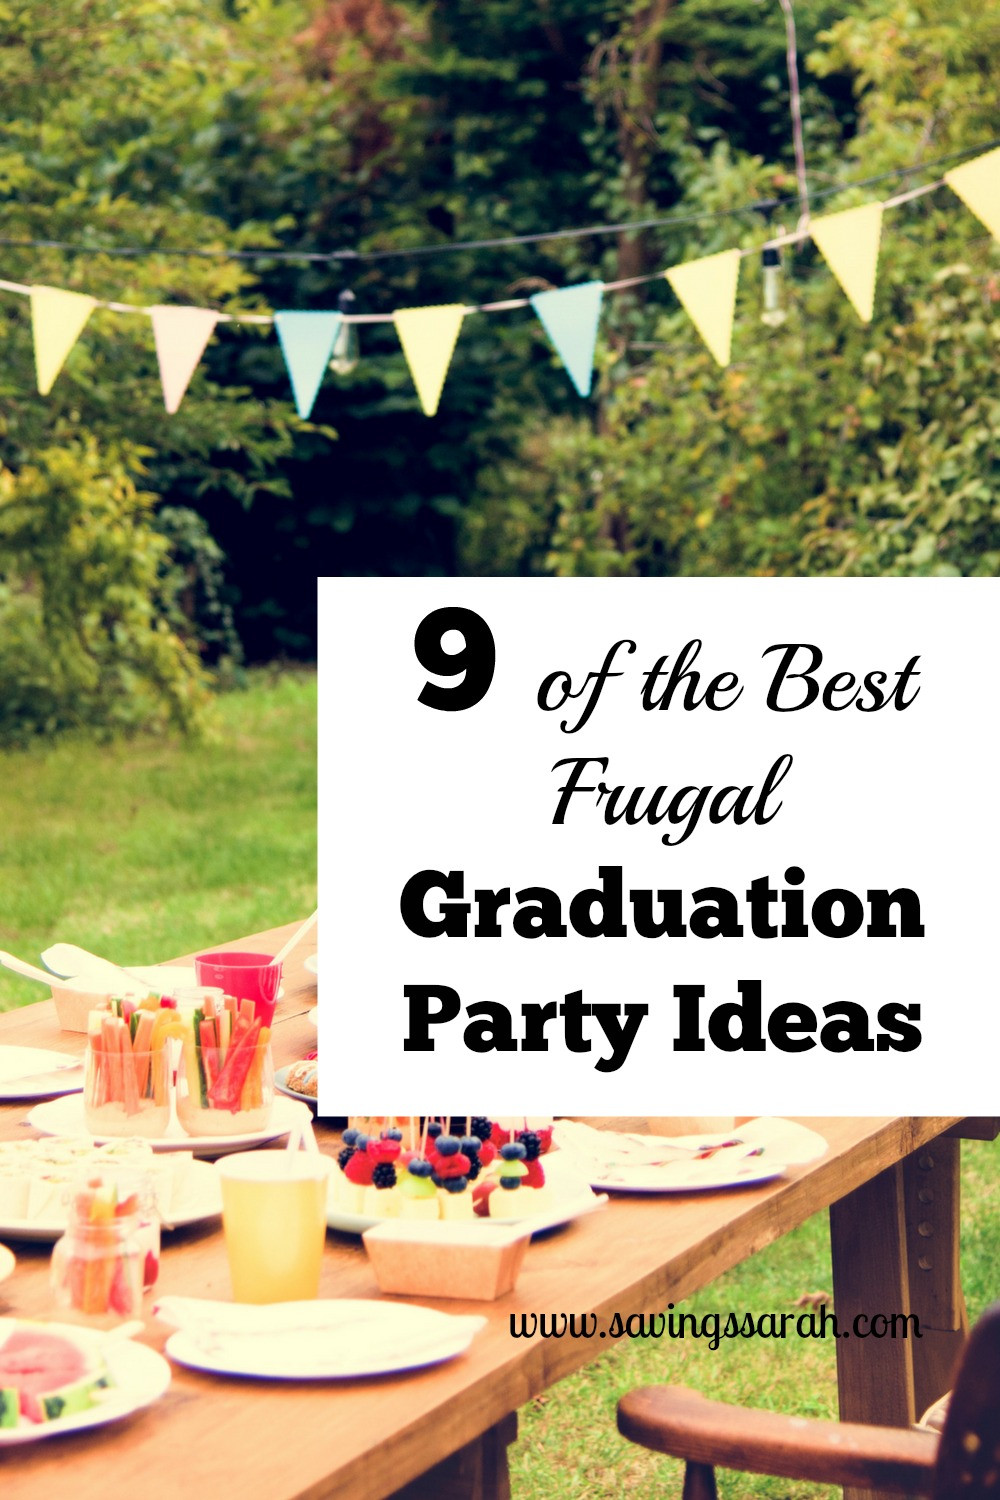 Graduation Party Ideas On A Budget
 9 the Best Frugal Graduation Party Ideas Earning and